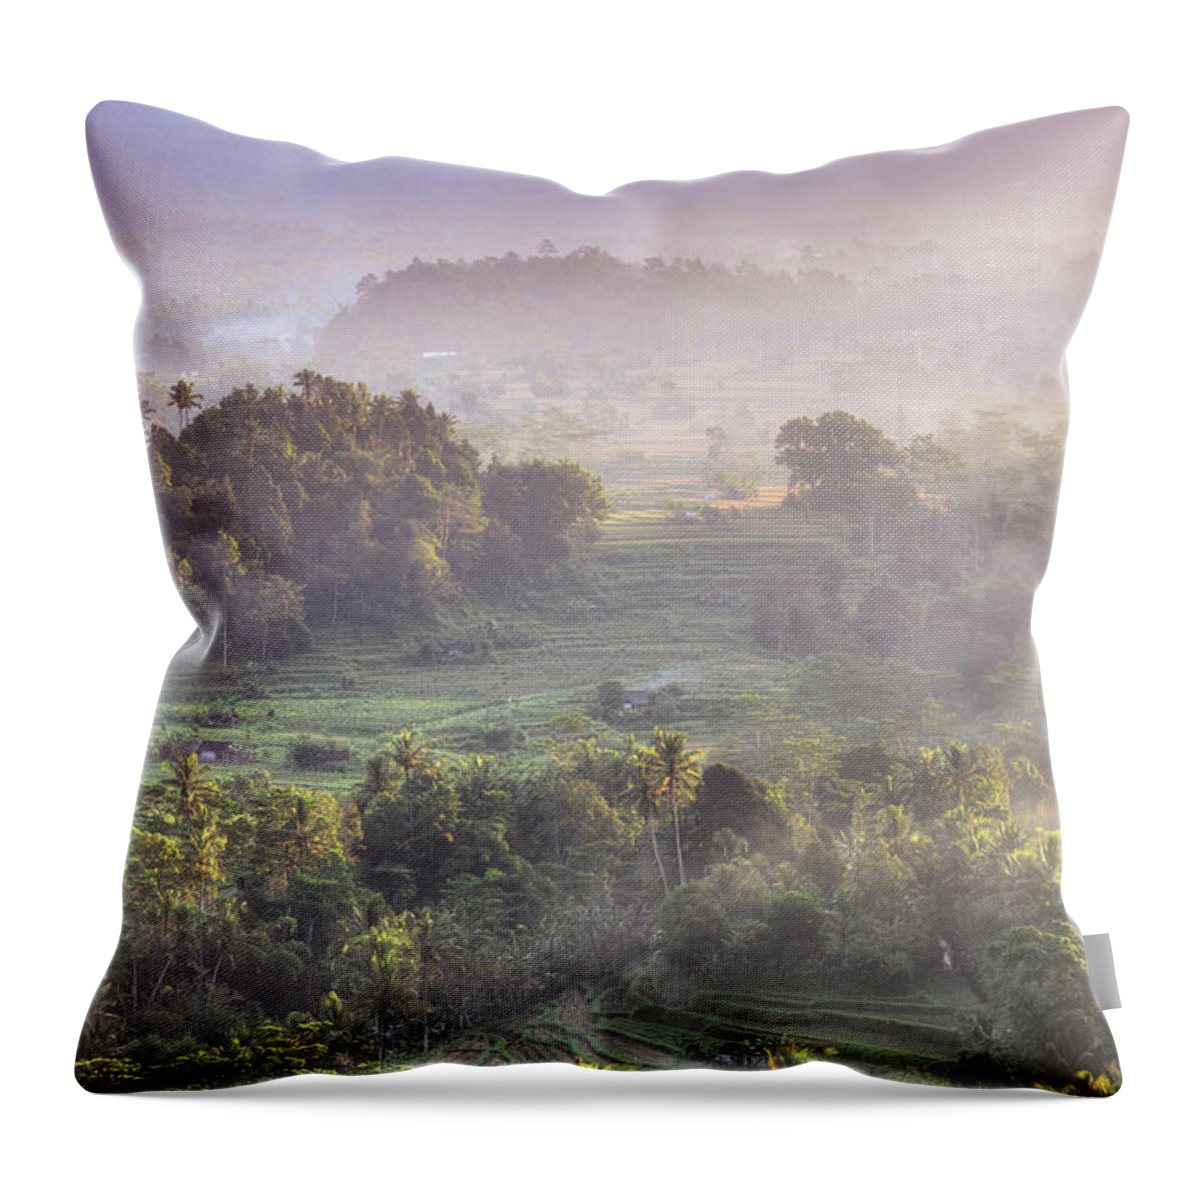 Tranquility Throw Pillow featuring the photograph Indonesia, Bali, Forest Landscape by Michele Falzone